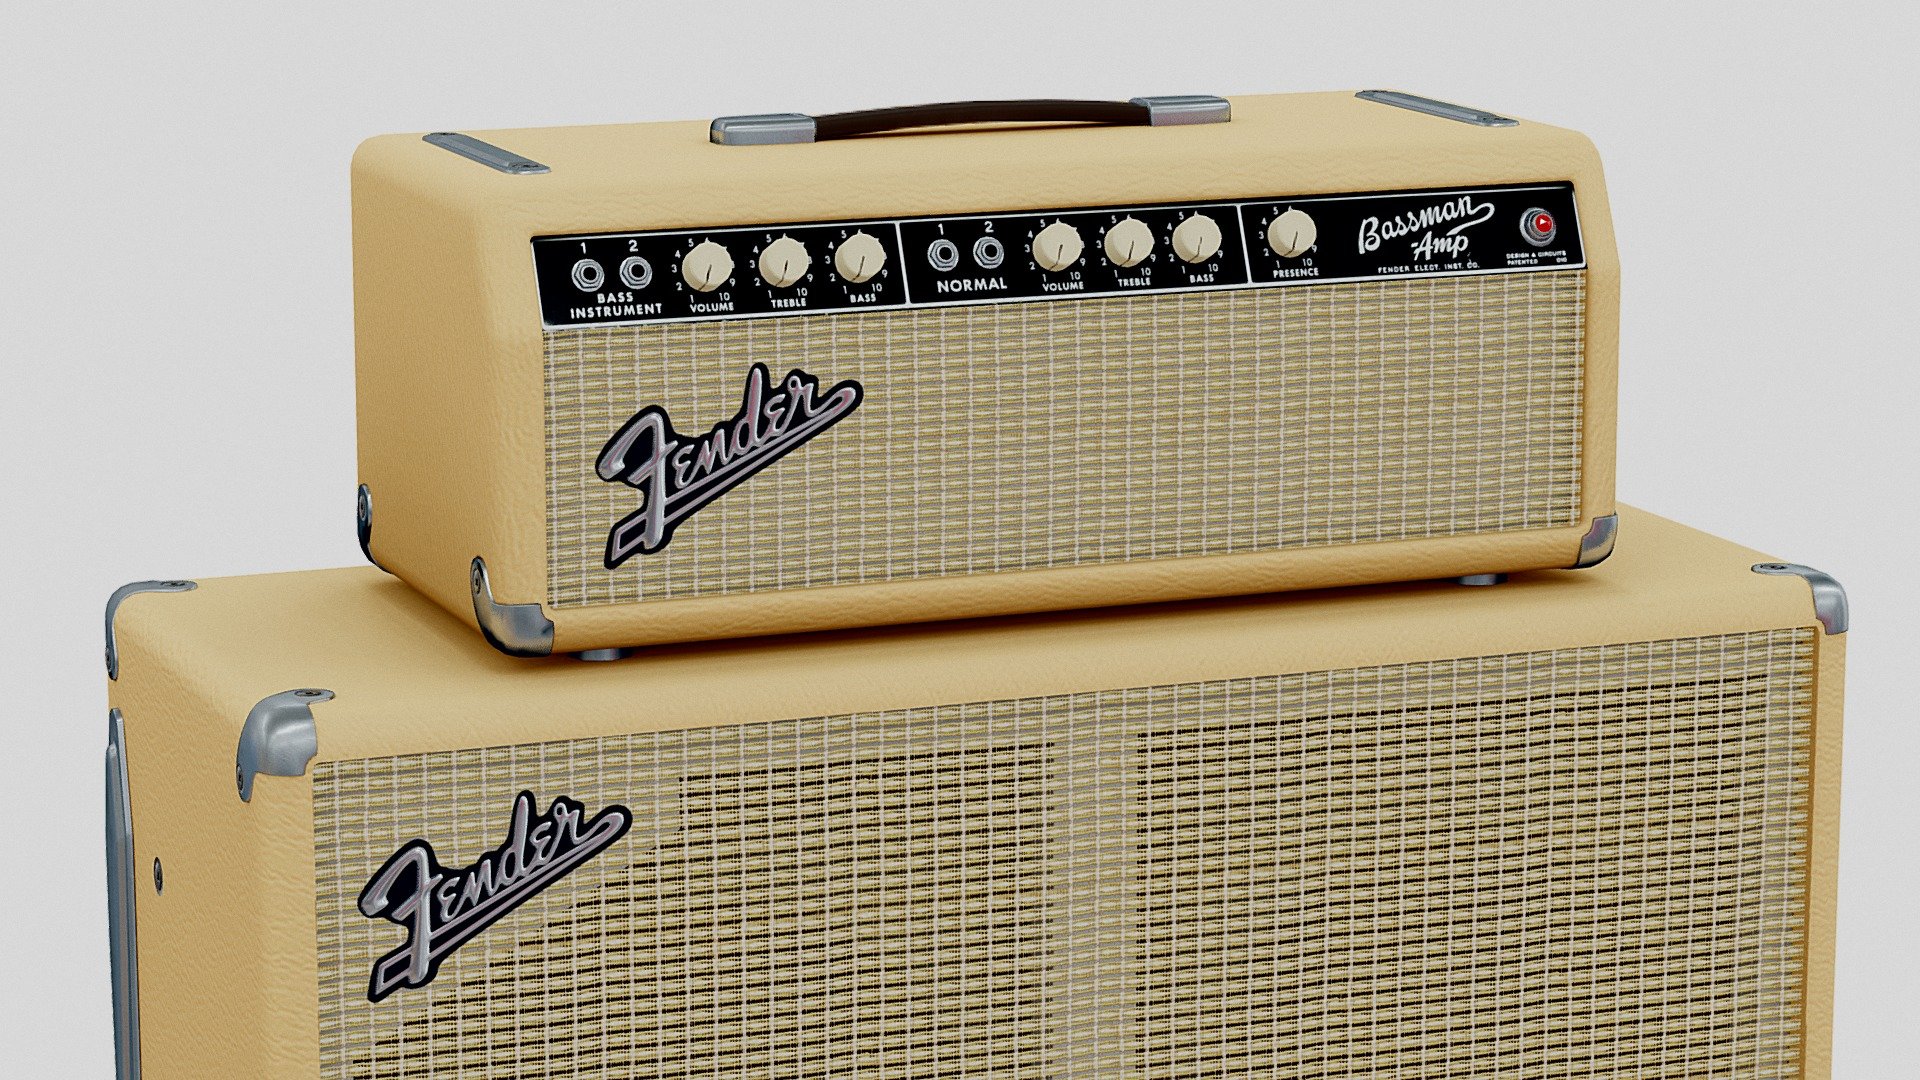 A vintage 1964 blonde Fender Bassman piggyback amp. This is one of the rare transitional models, which features largely brownface circuitry and cosmetics with a black faceplate. This amp also features the desirable 6G6-B circuit, popularized by Brian Setzer. There are a couple of changes, namely the output transformer and speaker. Fortunately the ouput was replaced with an original Schumacher 125A13A, manufactured in late 1962. This transformer would have been pulled from a 1962 or 1963 Blonde Bassman, so it is identical to the original output transformer. The replacement speaker is a 1969 Oxford 12T6, which could have been pulled a pull from a higher-powered &lsquo;69 Fender amp or could have been an OEM replacement for a blown original speaker. All other changes constitute routine mantainance, like new filter capacitors and a grounded power cord for electrical safety 3d model